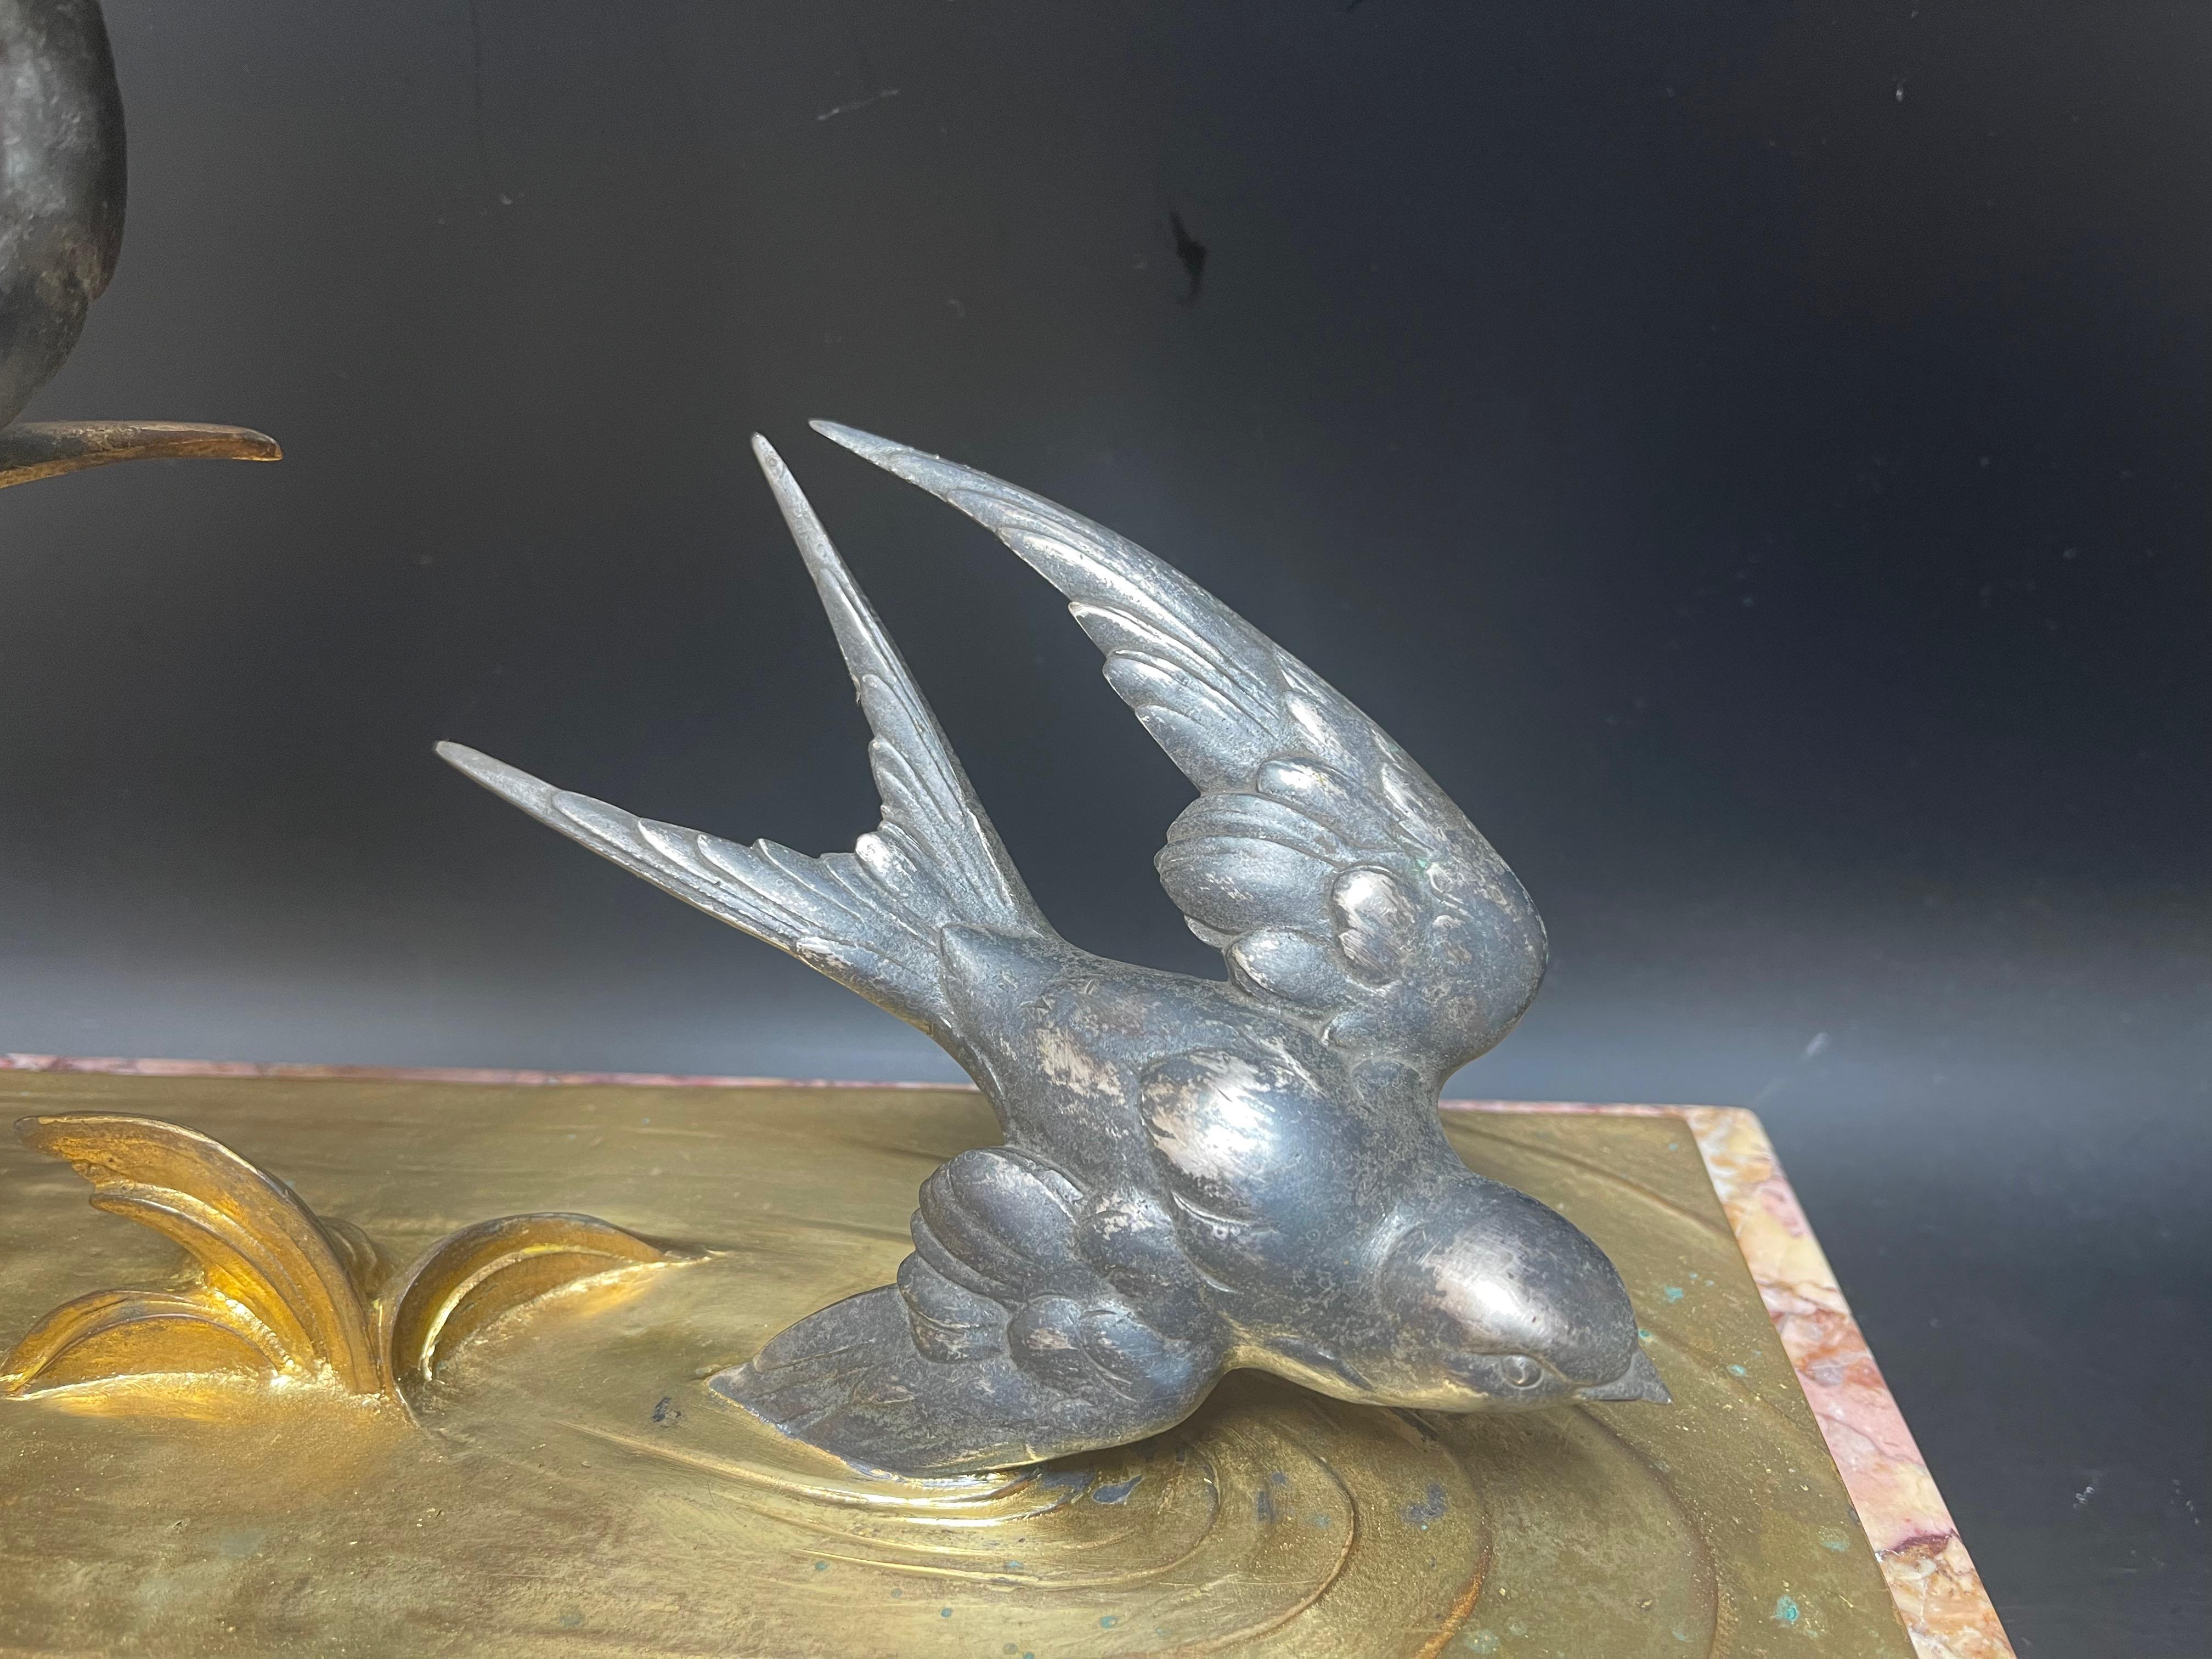 Art deco bronze with double patina, mercury gilding and silver.
Representing 3 swallows on a pond.
Signed M Buzelin and Gauthier estr Paris for the founder.
In very good shape.

Height: 21.5 cm
Length: 50.5 cm
Width: 13 cm
Weight: 11 Kg